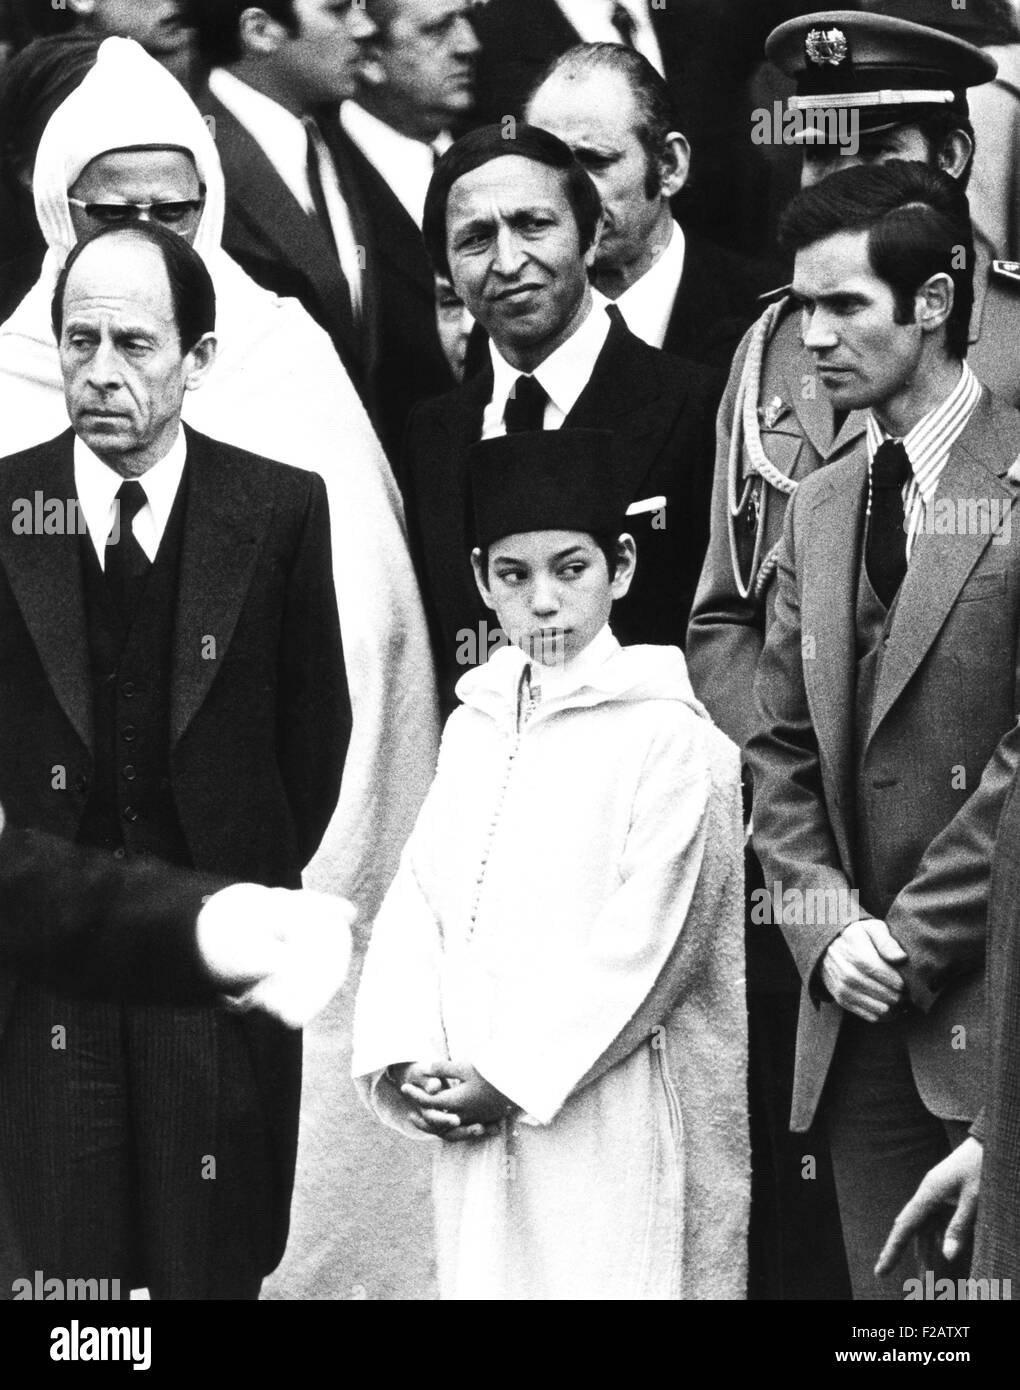 Morocco's crown Prince Sidi Mohammed at memorial services for French Pres. George Pompidou. April 6, 1974. At left is French Foreign Minister Michael Jobert. The Crown Prince ascended to the throne on July 23, 1999 upon the death of his father, King Hassan II. (CSU 2015 11 1554) Stock Photo